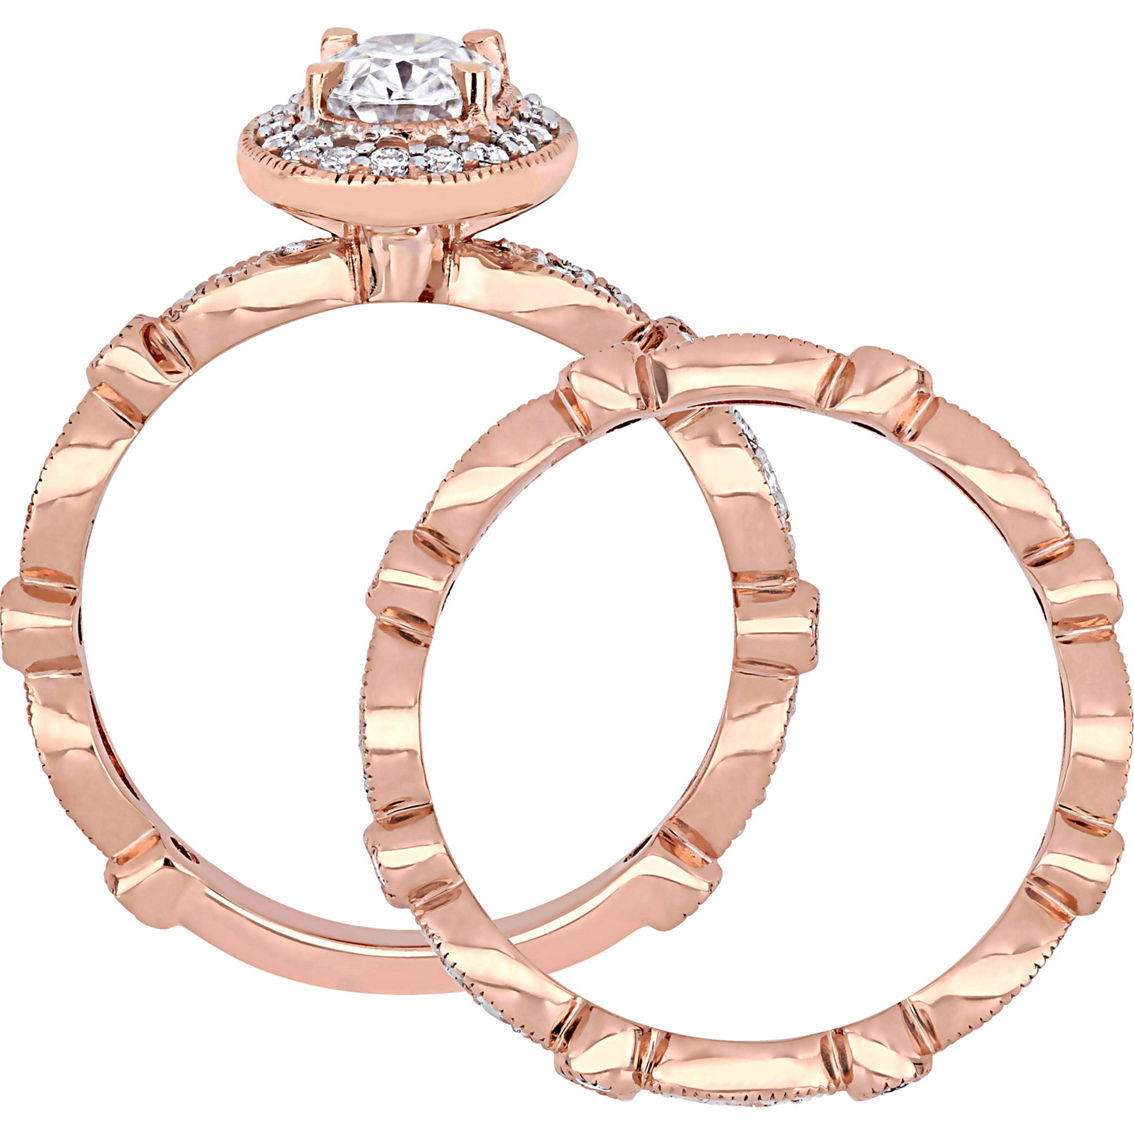 Sofia B. 10K Rose Gold 1 1/2 CTW Moissanite Oval Halo Infinity Engagement Ring - Image 3 of 5